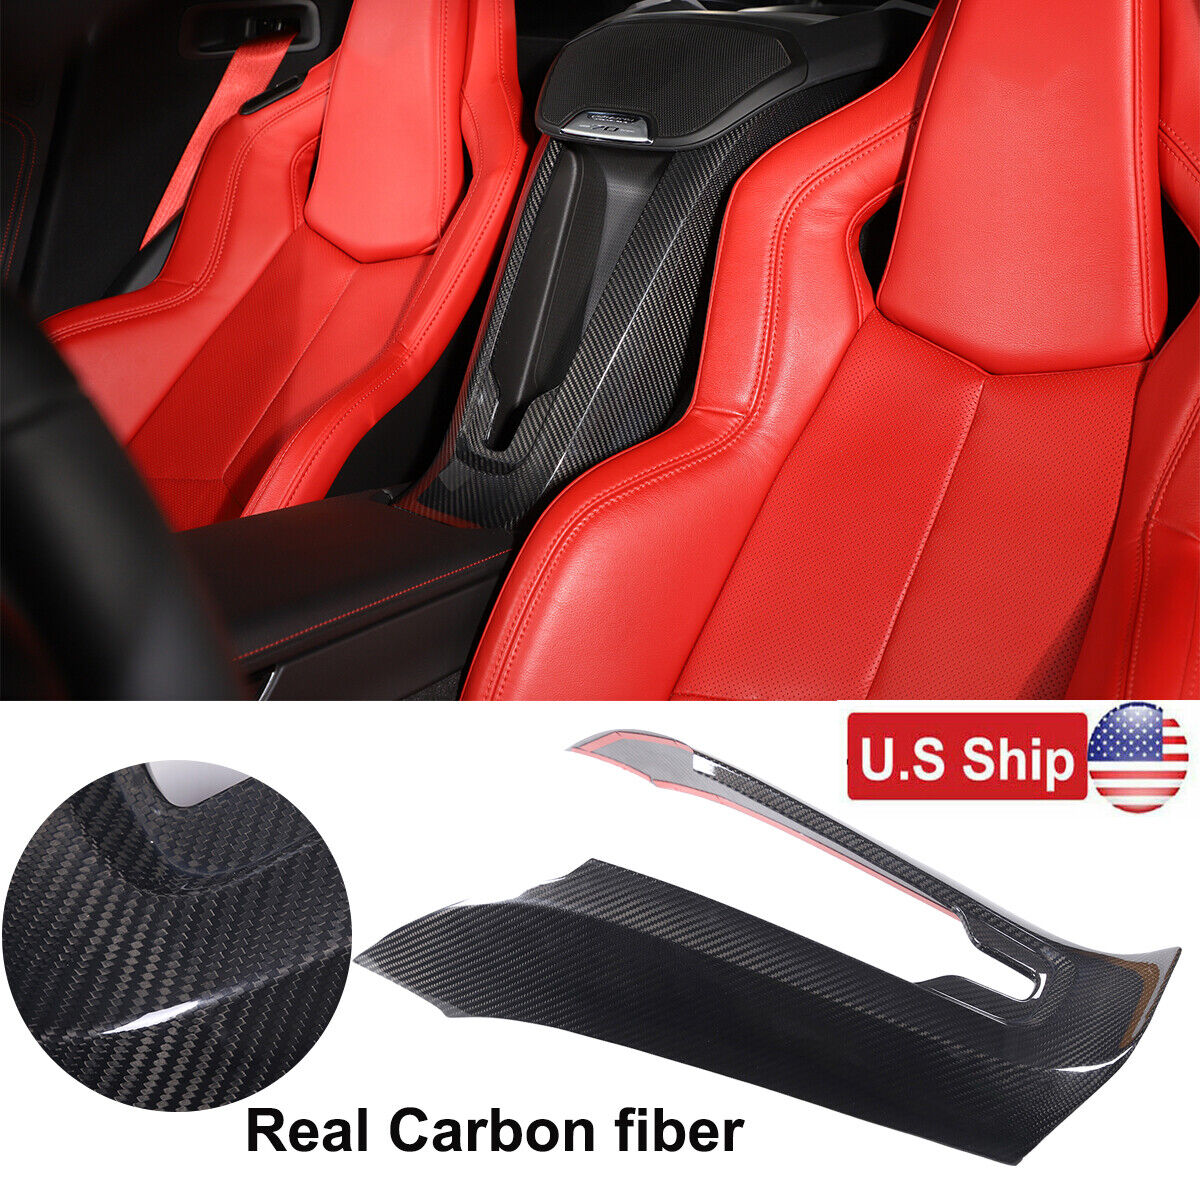 Real Carbon Fiber Waterfall Console Wireless Charger Cover For Corvette C8 20+US